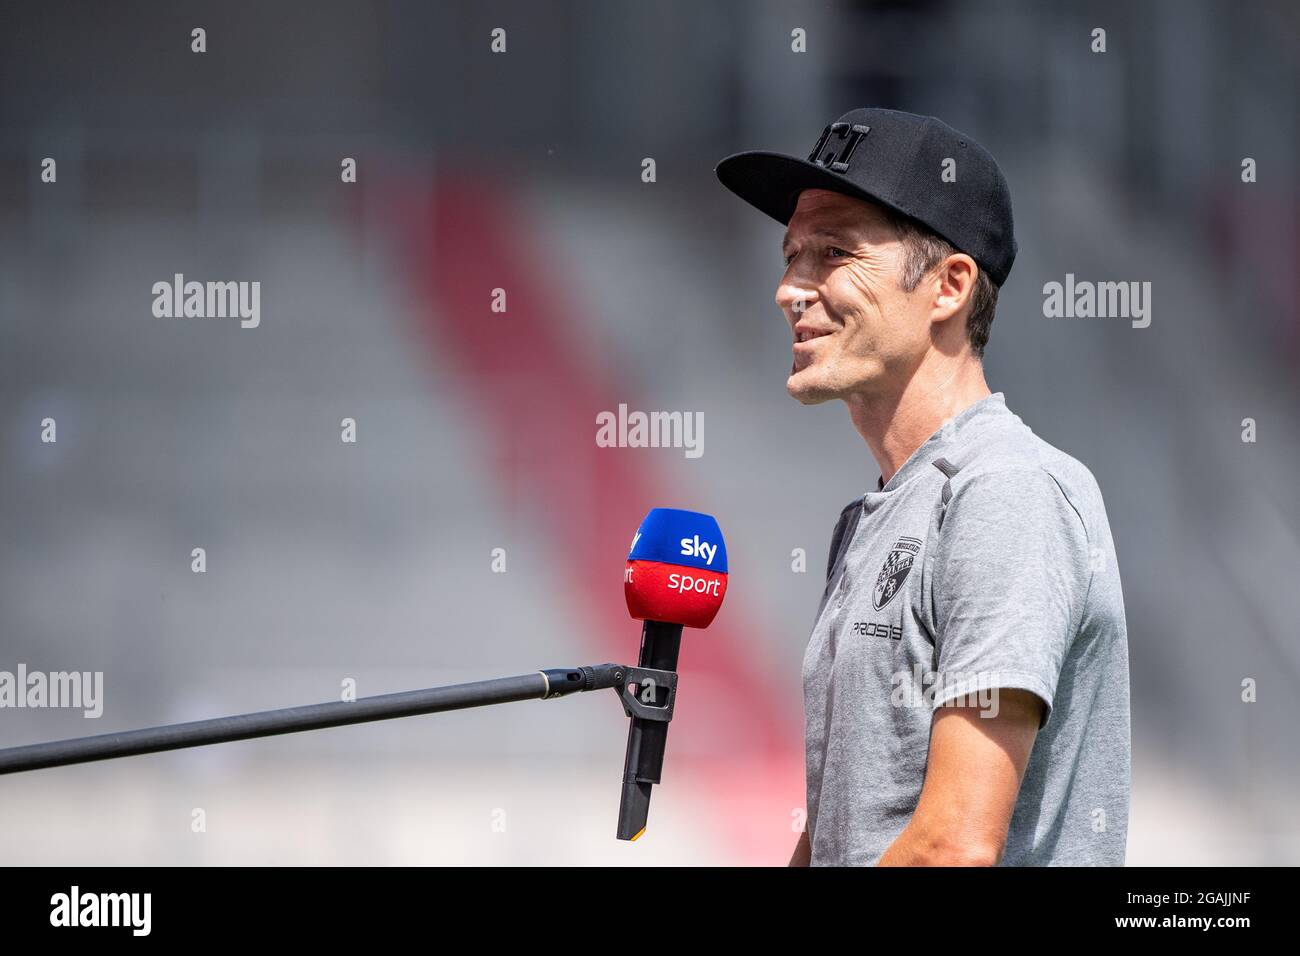 Ingolstadt, Germany. 31st July, 2021. Football: 2nd Bundesliga, FC Ingolstadt 04 - 1. FC Heidenheim, Matchday 2 at Audi Sportpark. Coach Roberto Pätzold of Ingolstadt gives an interview before the start of the match. Credit: Matthias Balk/dpa - IMPORTANT NOTE: In accordance with the regulations of the DFL Deutsche Fußball Liga and/or the DFB Deutscher Fußball-Bund, it is prohibited to use or have used photographs taken in the stadium and/or of the match in the form of sequence pictures and/or video-like photo series./dpa/Alamy Live News Stock Photo